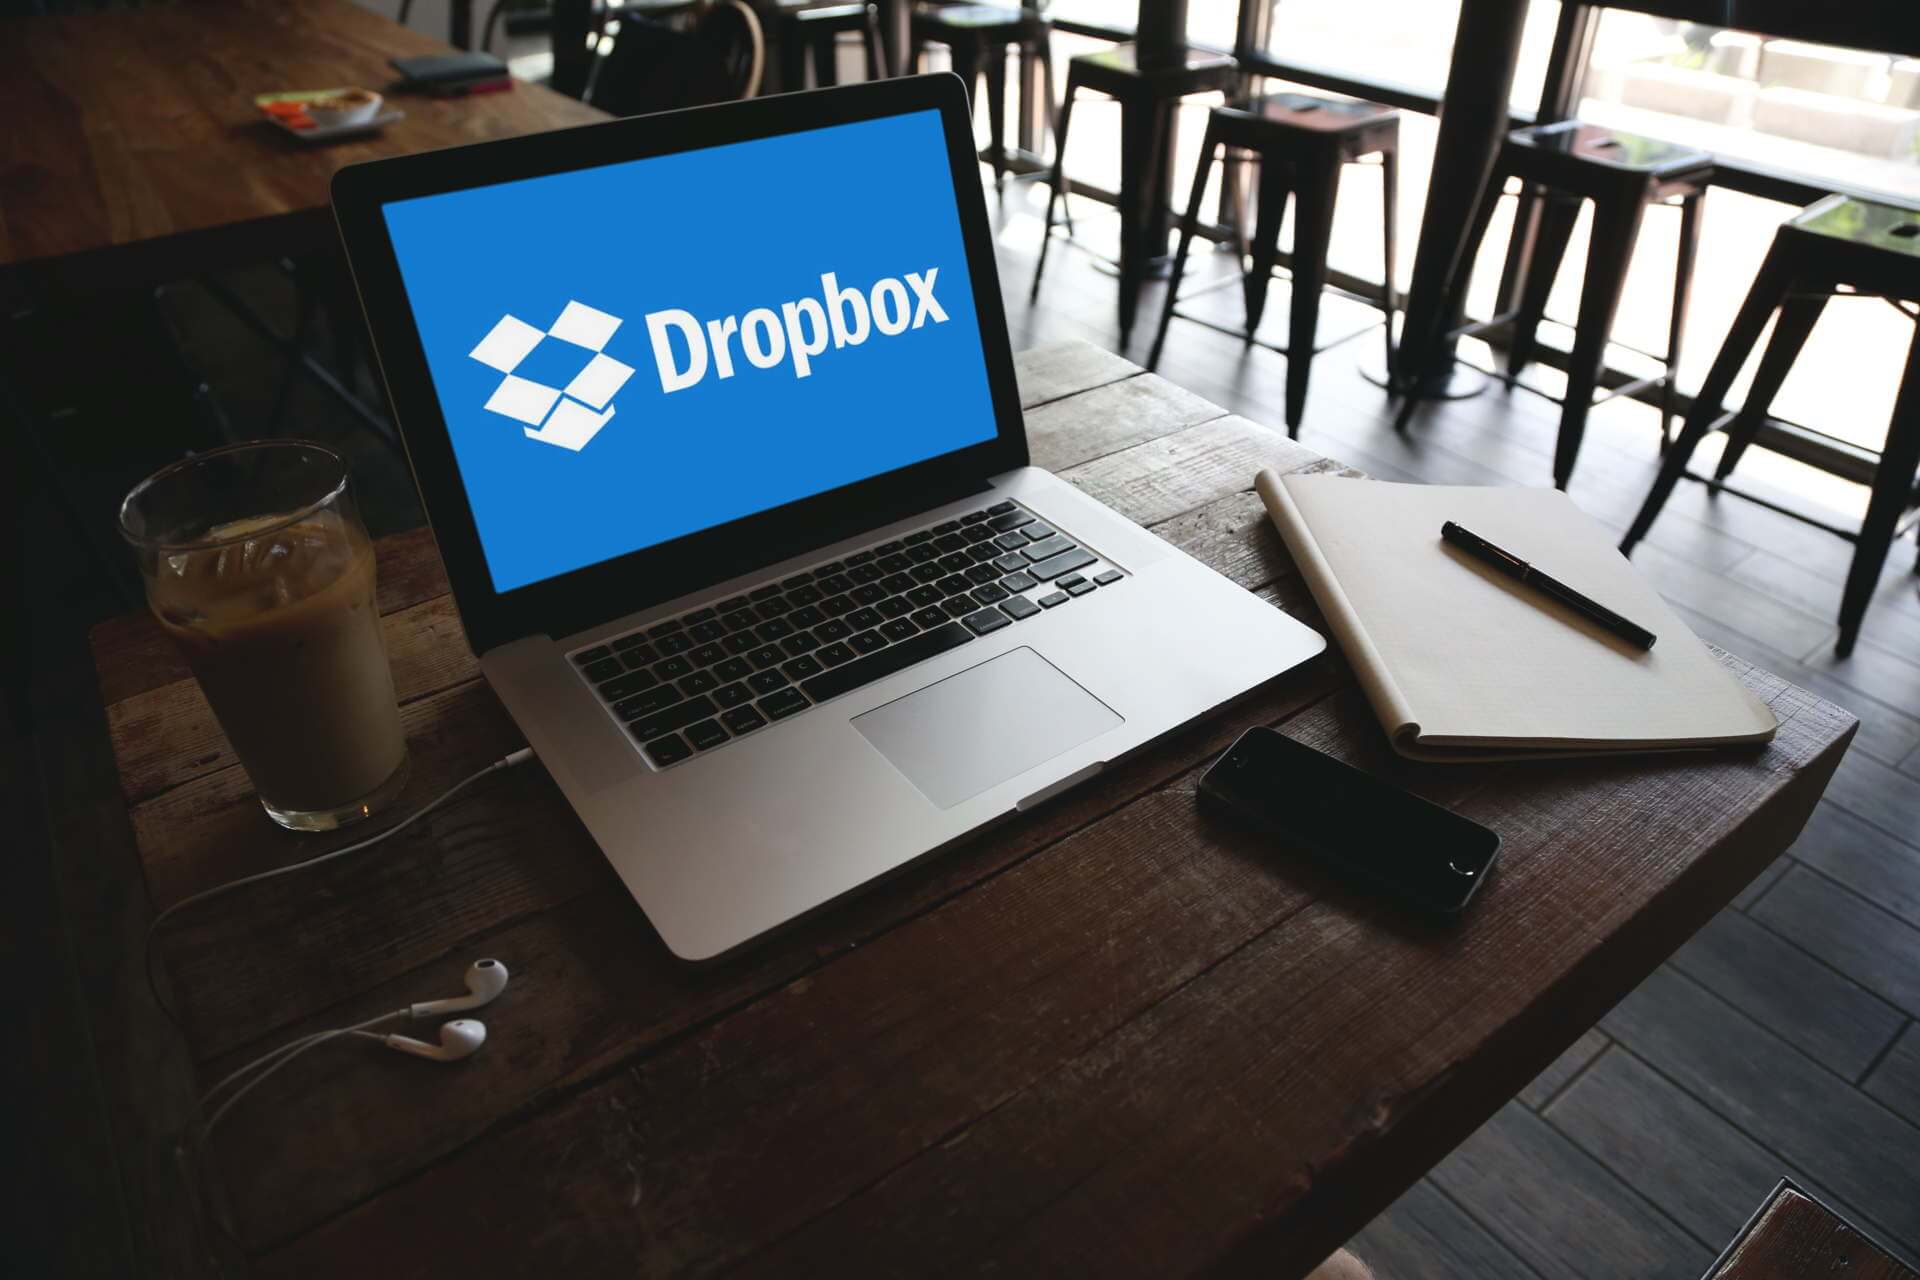 How can I add Dropbox to File Explorer